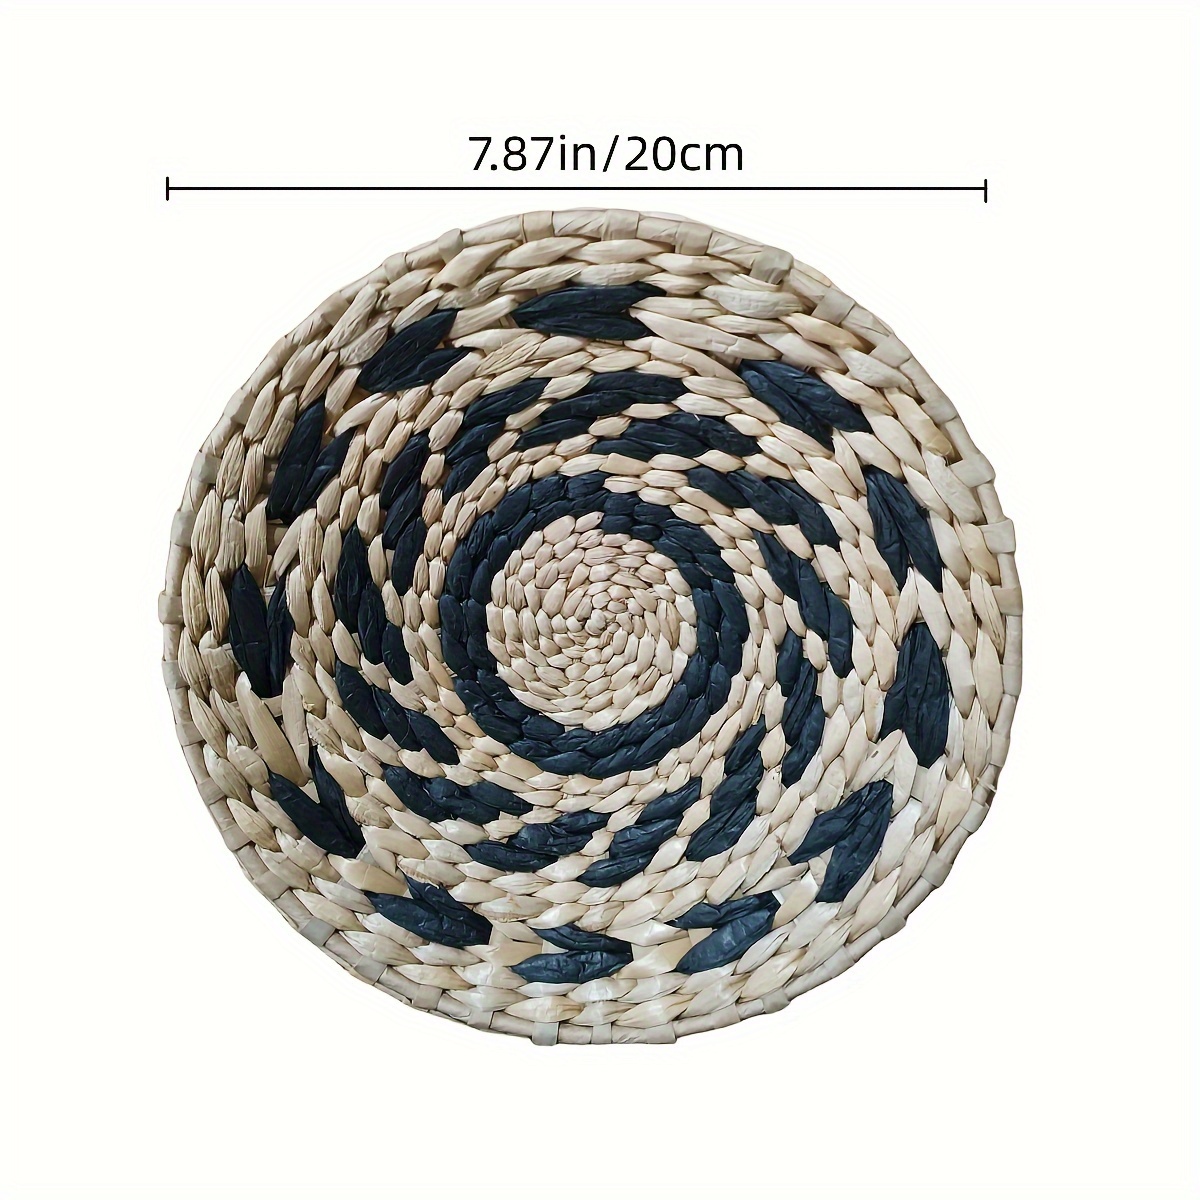 Straw Woven Round Wall Decor Pendants Creative Retro Ethnic Background  Bedside Ornament Ethnic Style Hand-woven Hanging